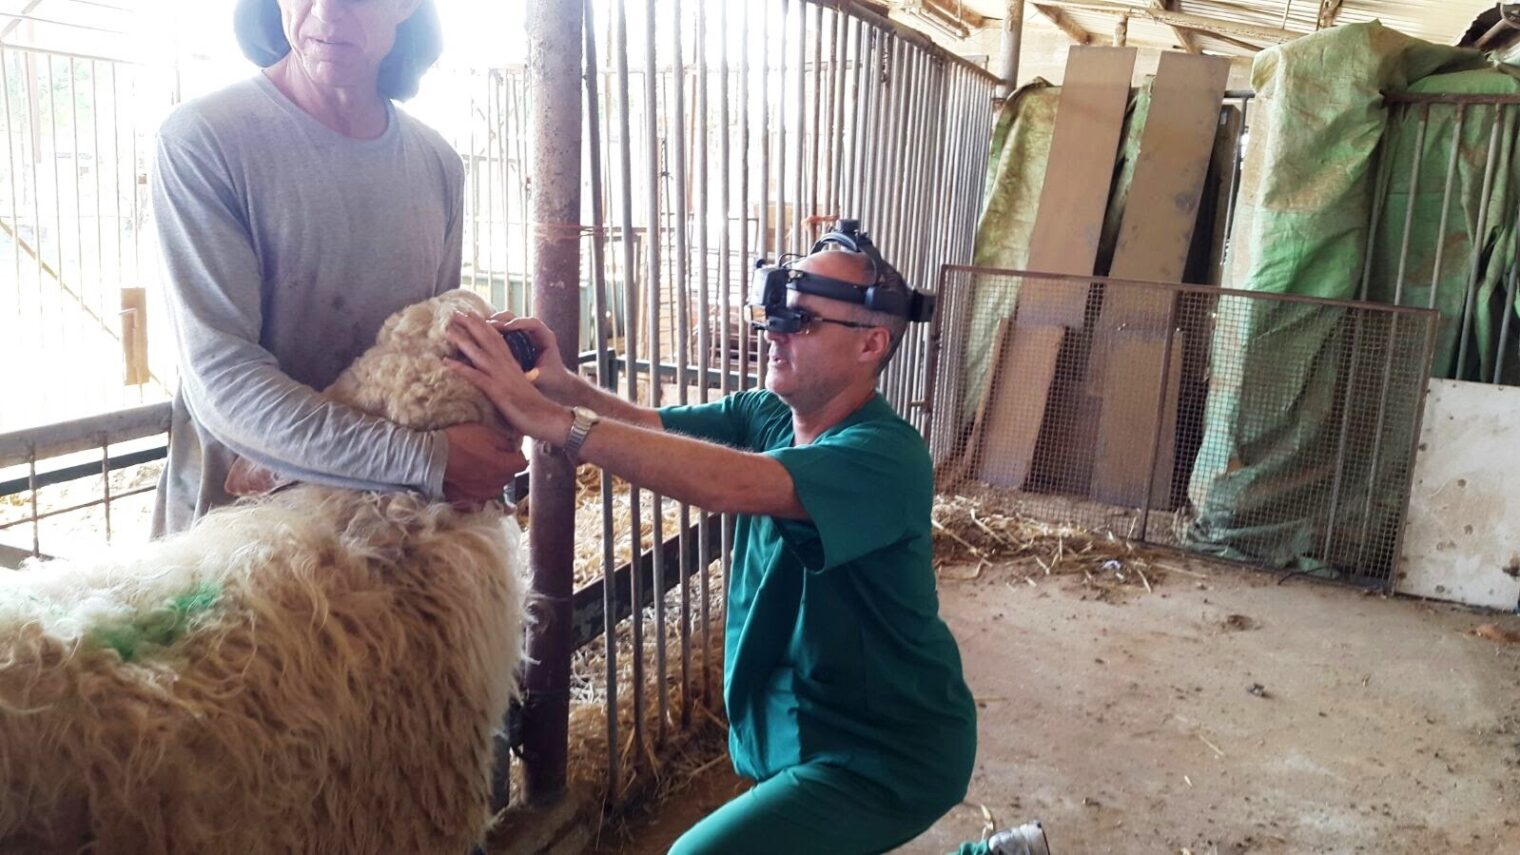 Hebrew University Prof. Ron Ofri makes a house call to one of his sheep patients. Photo courtesy of Hebrew University